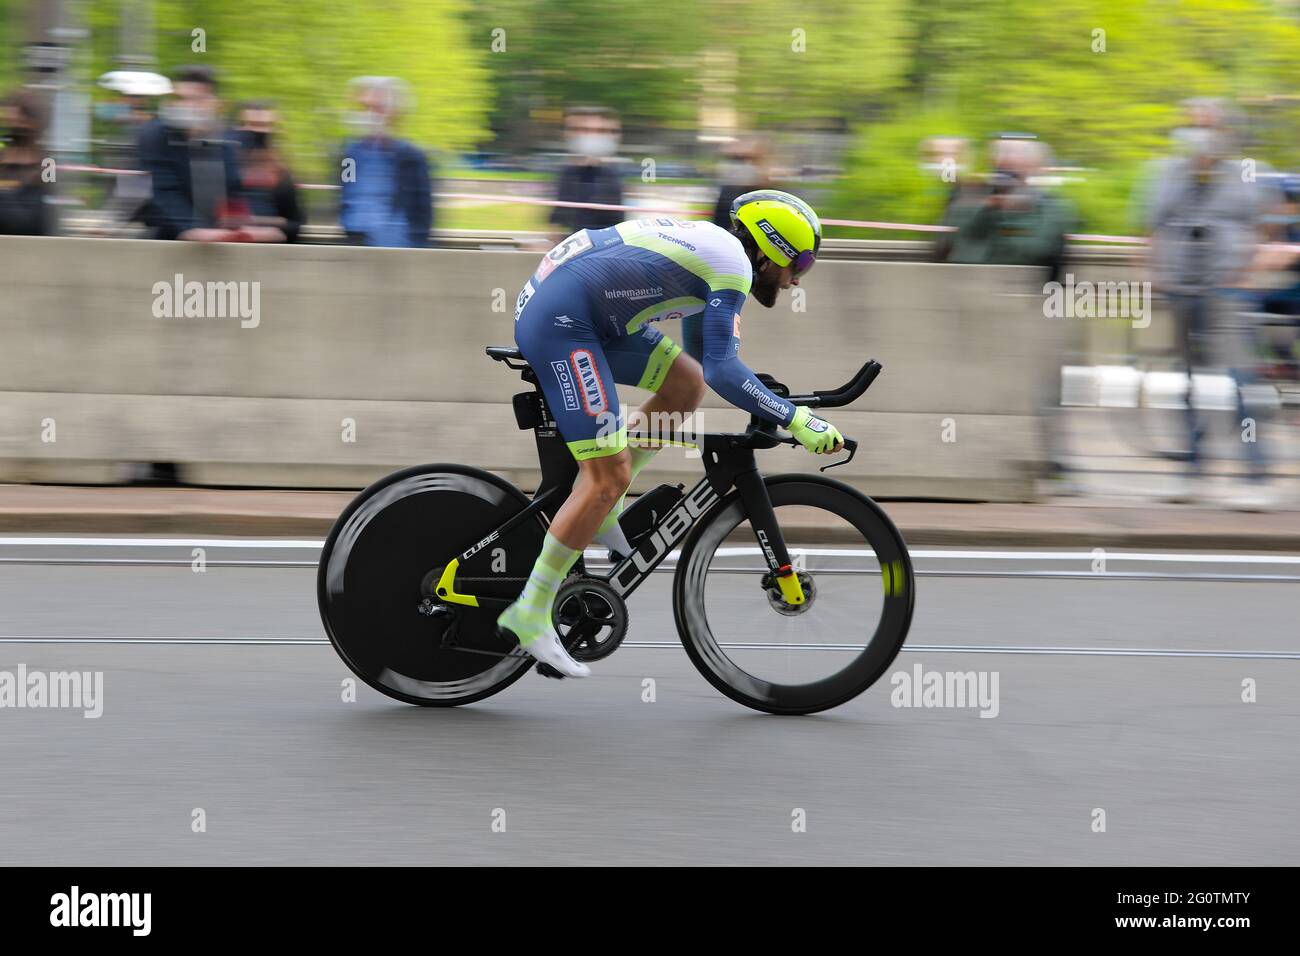 Turin, Italy. 08th May, 2021. Andrea Pasqualon (Intermarché Wanty Gaubert Materiaux) in action during an individual time trial.The Giro d'Italia took place from 8th to 30th May 2021. The first stage on May 8th was a time trial of 8 kilometers in the streets of Turin. The winner of this first stage is the Italian Filippo Ganna (Team Ineos Grenadiers). The winner of the final general classification is the Colombian Egan Bernal (Team Ineos Grenadier). (Photo by Laurent Coust/SOPA Images/Sipa USA) Credit: Sipa USA/Alamy Live News Stock Photo